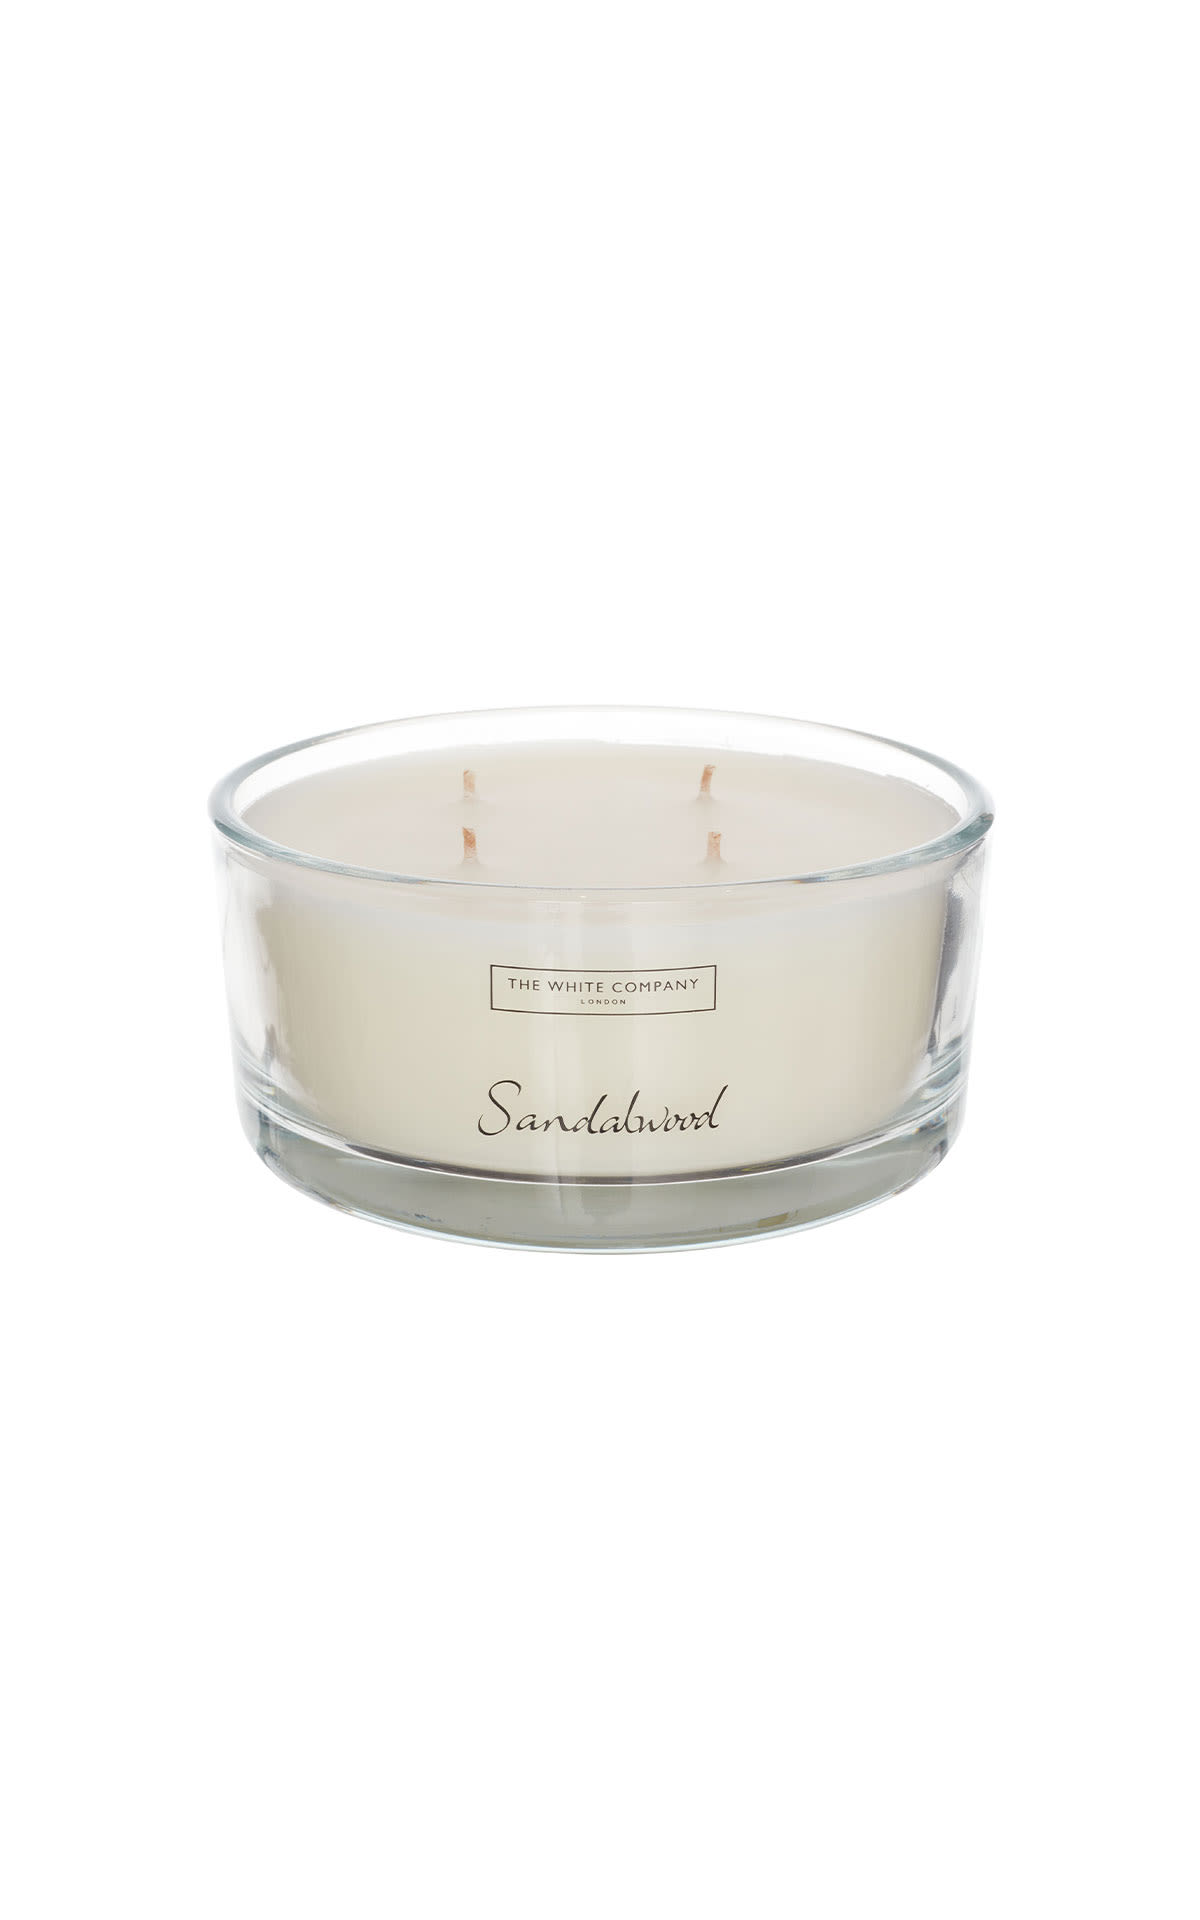 The White Company Sandlewood candle from Bicester Village